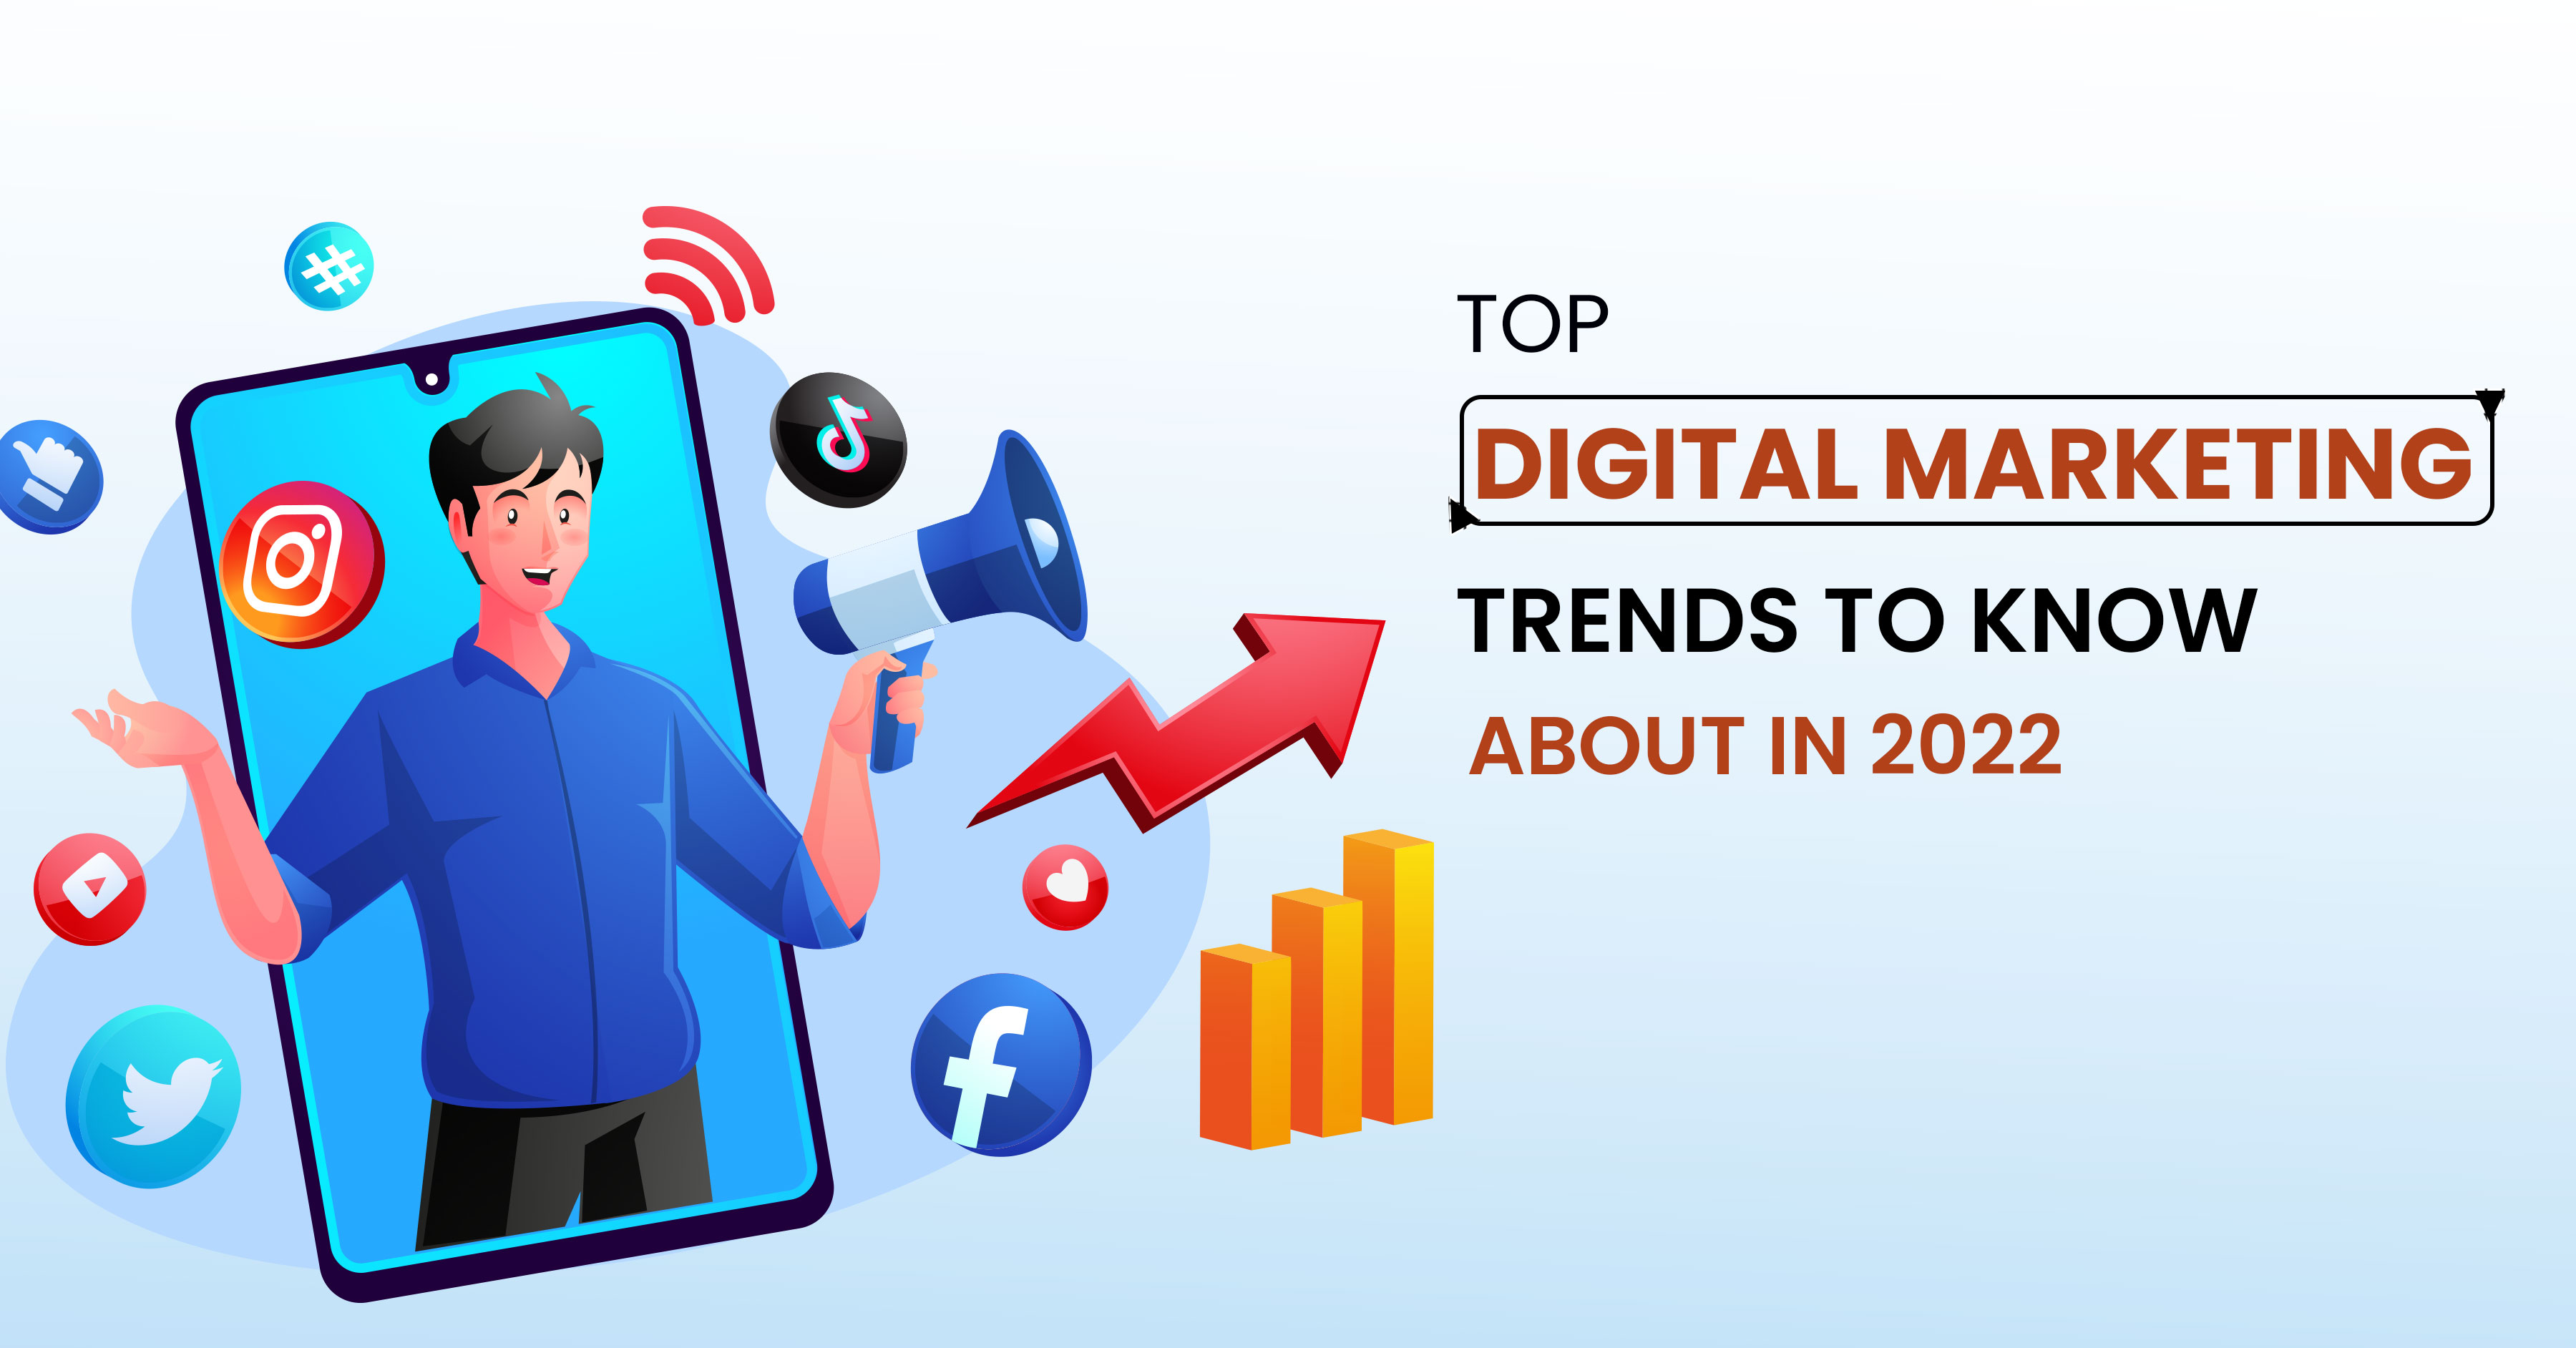 Top Digital Marketing Trends to Know About in 2022